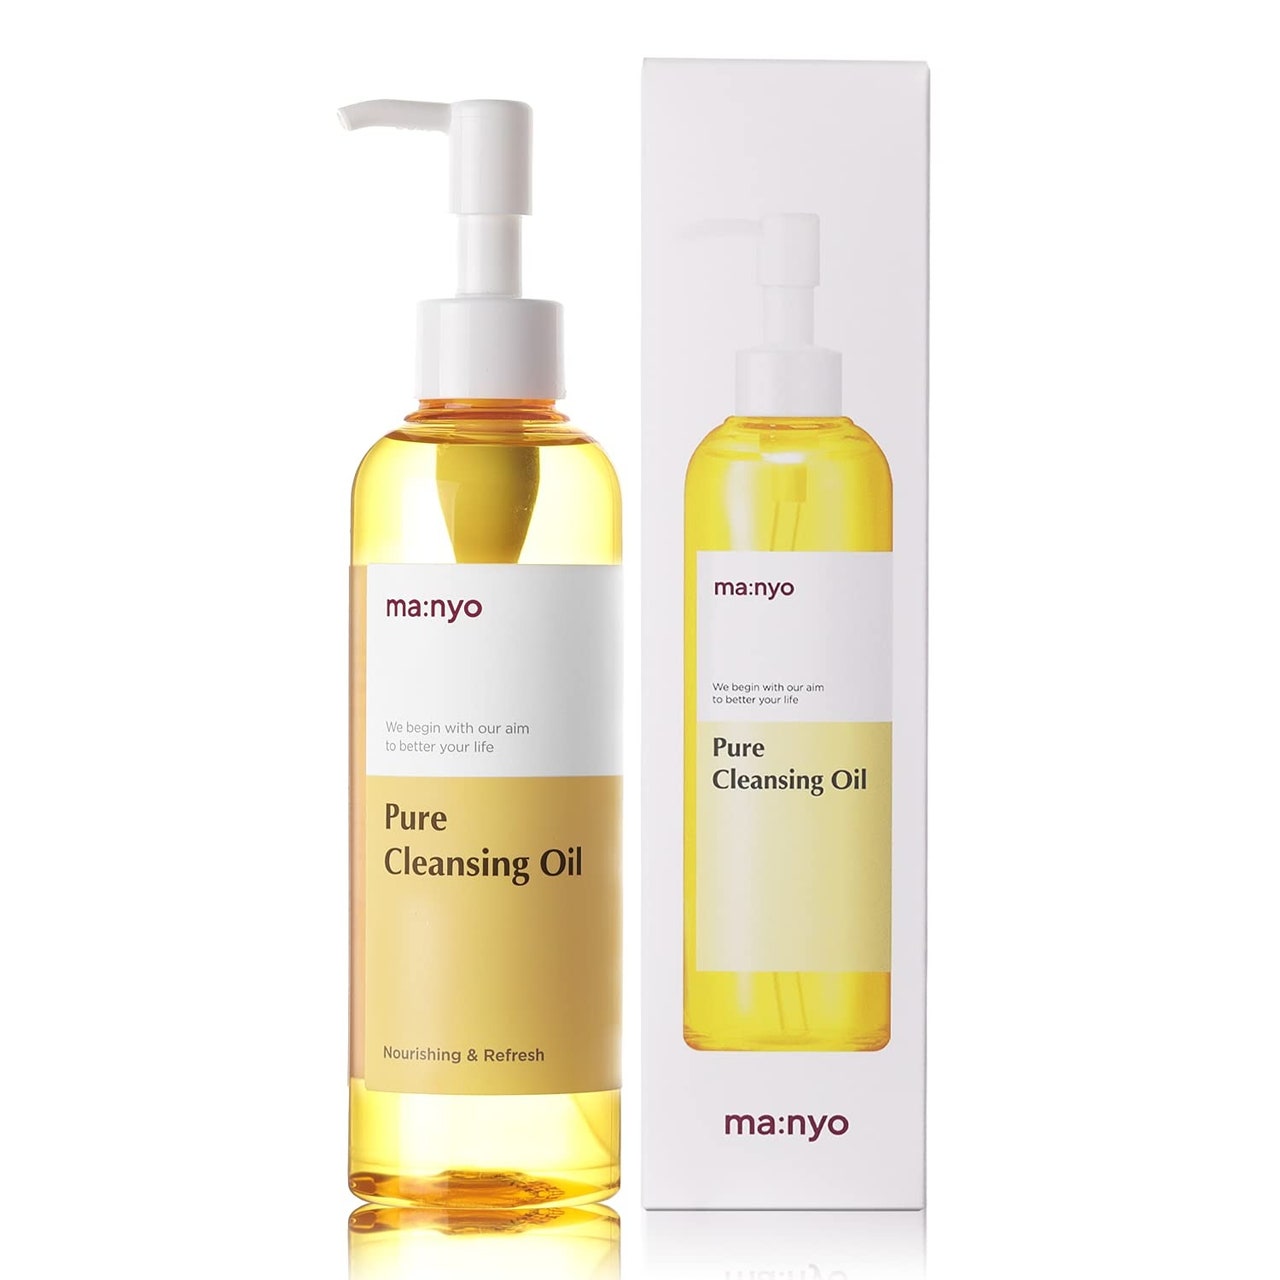 Manyo Factory Pure Cleansing Oil and box on white background